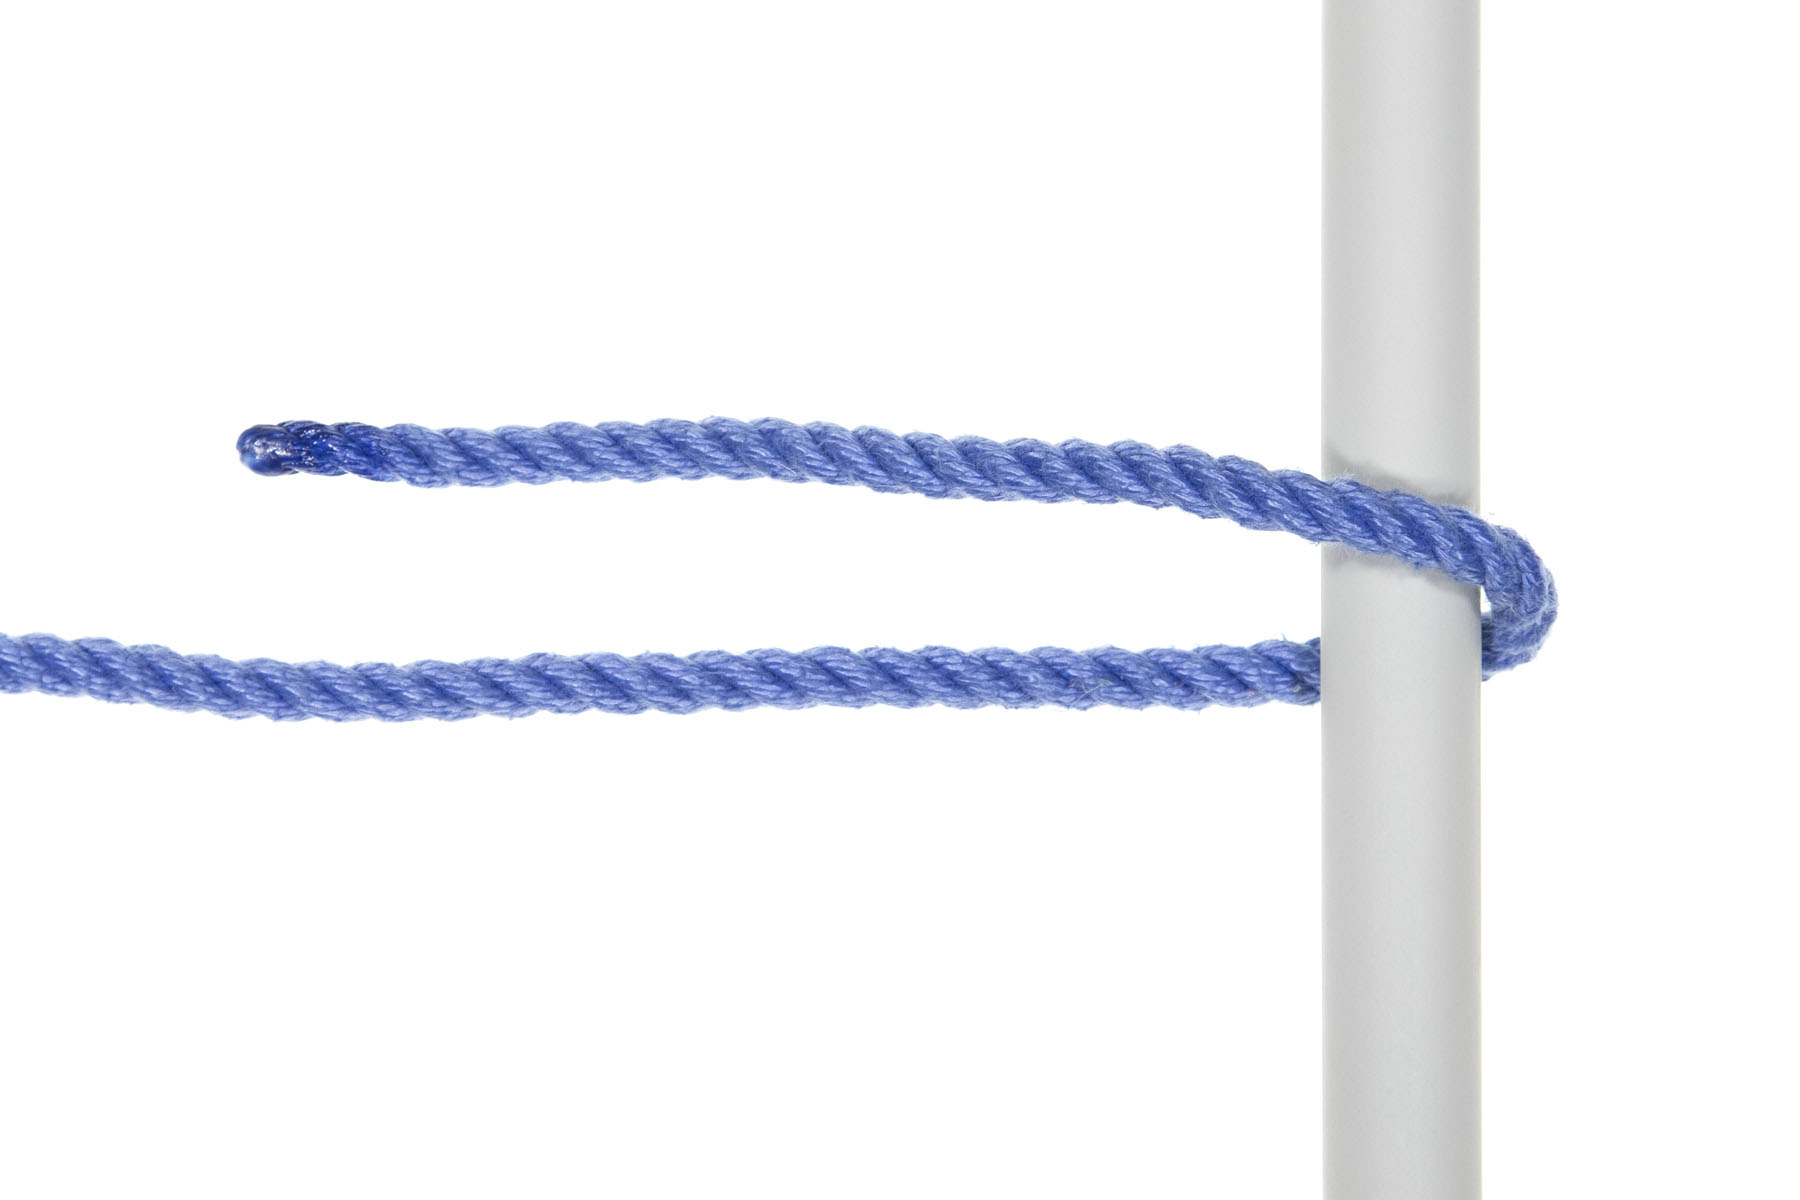 A single blue rope enters from the left, crosses under a vertical gray pole, and turns back toward the left.